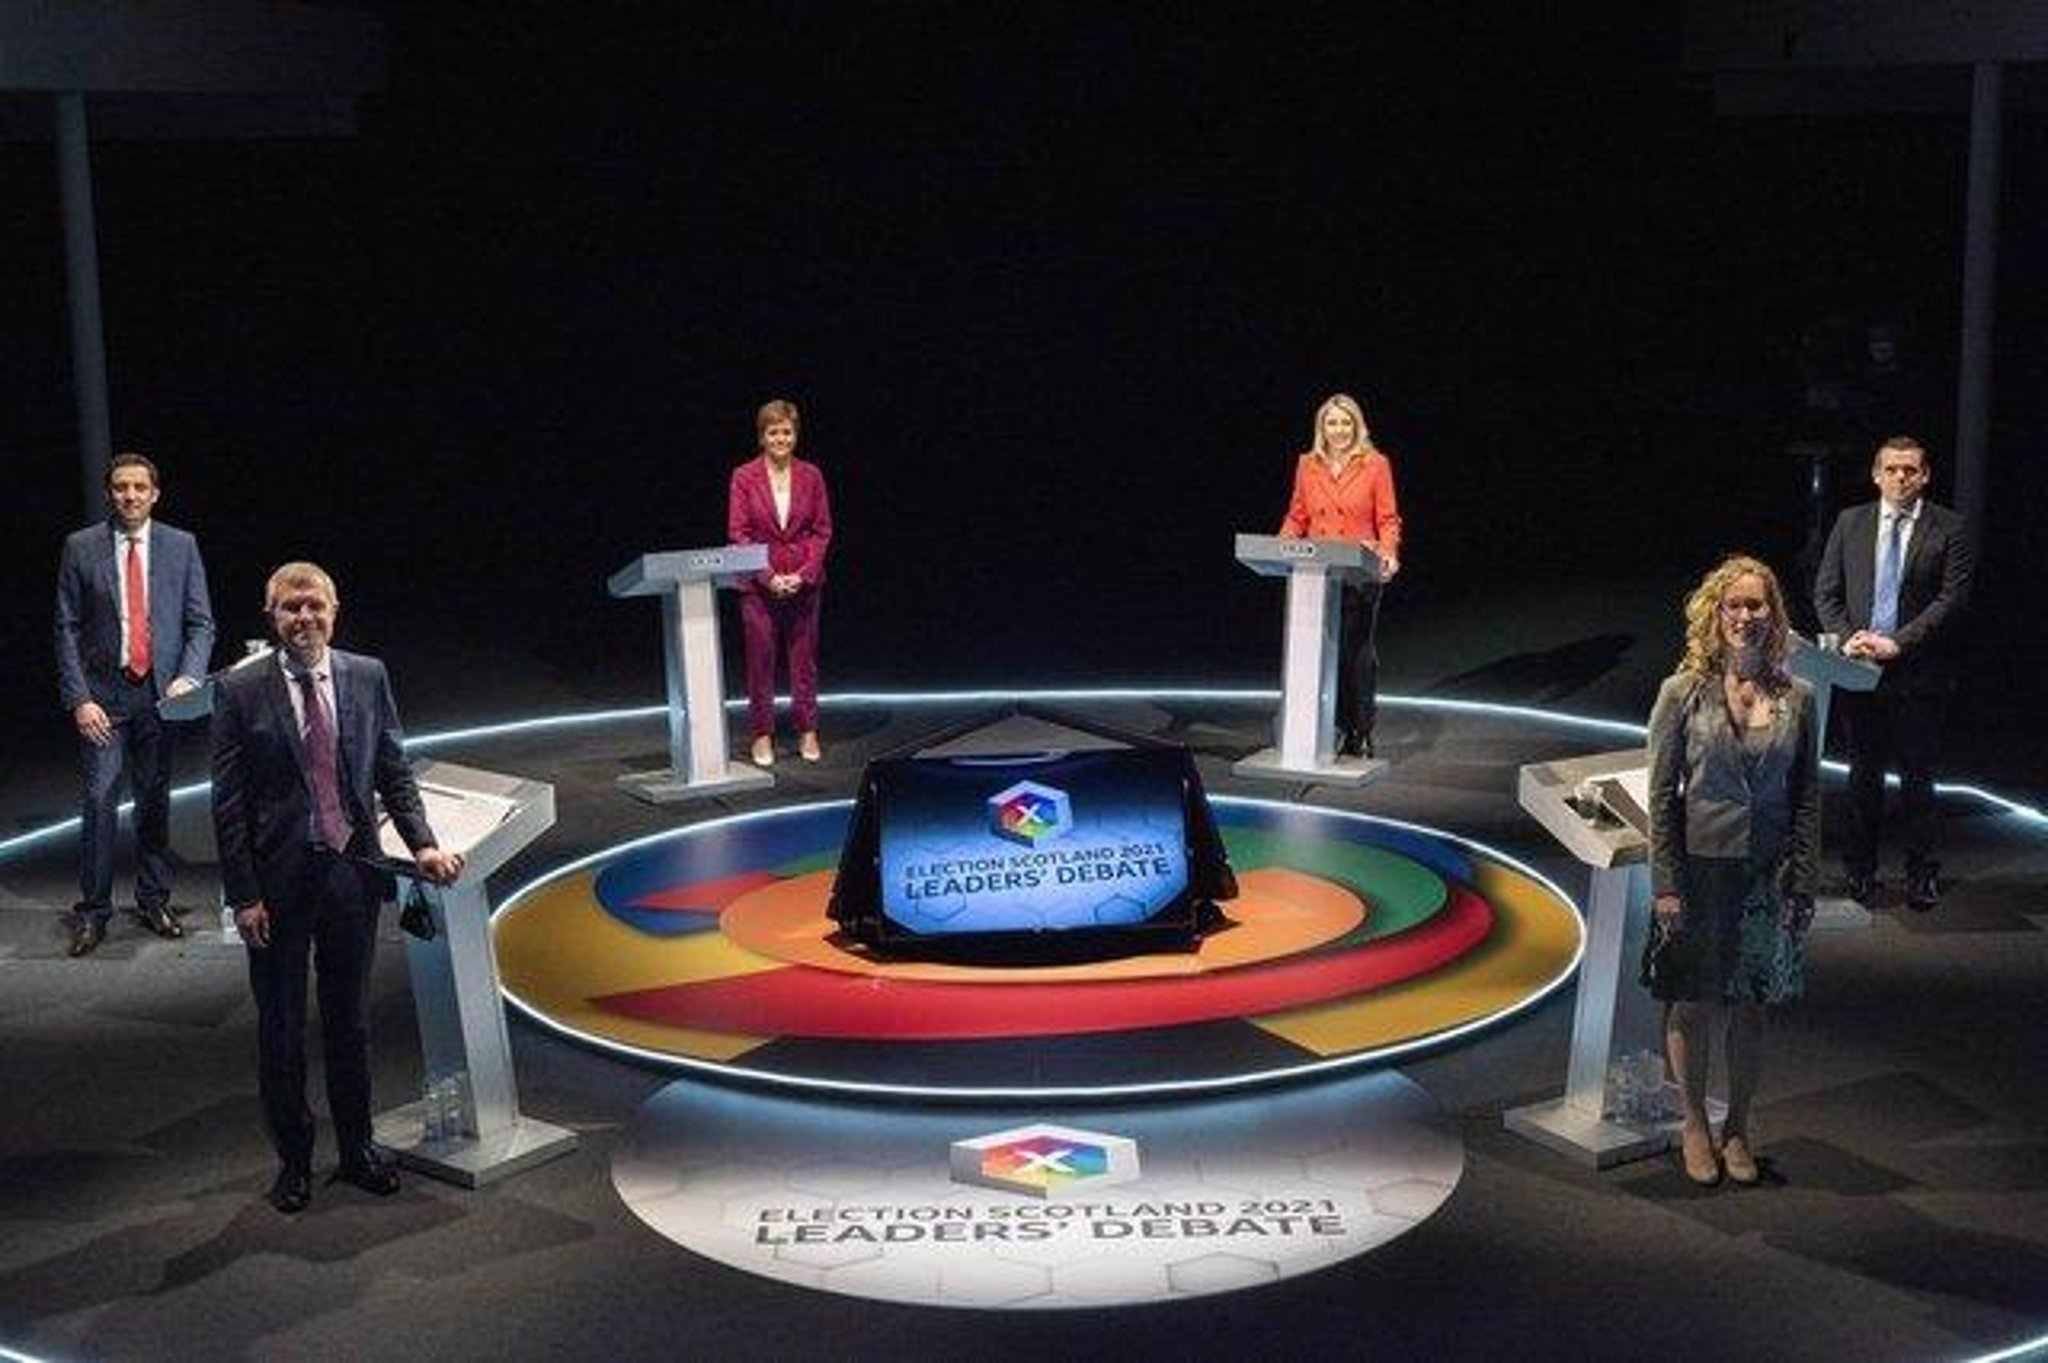 Scottish election 2021: Follow here for LIVE updates on the BBC Scotland leaders' debate